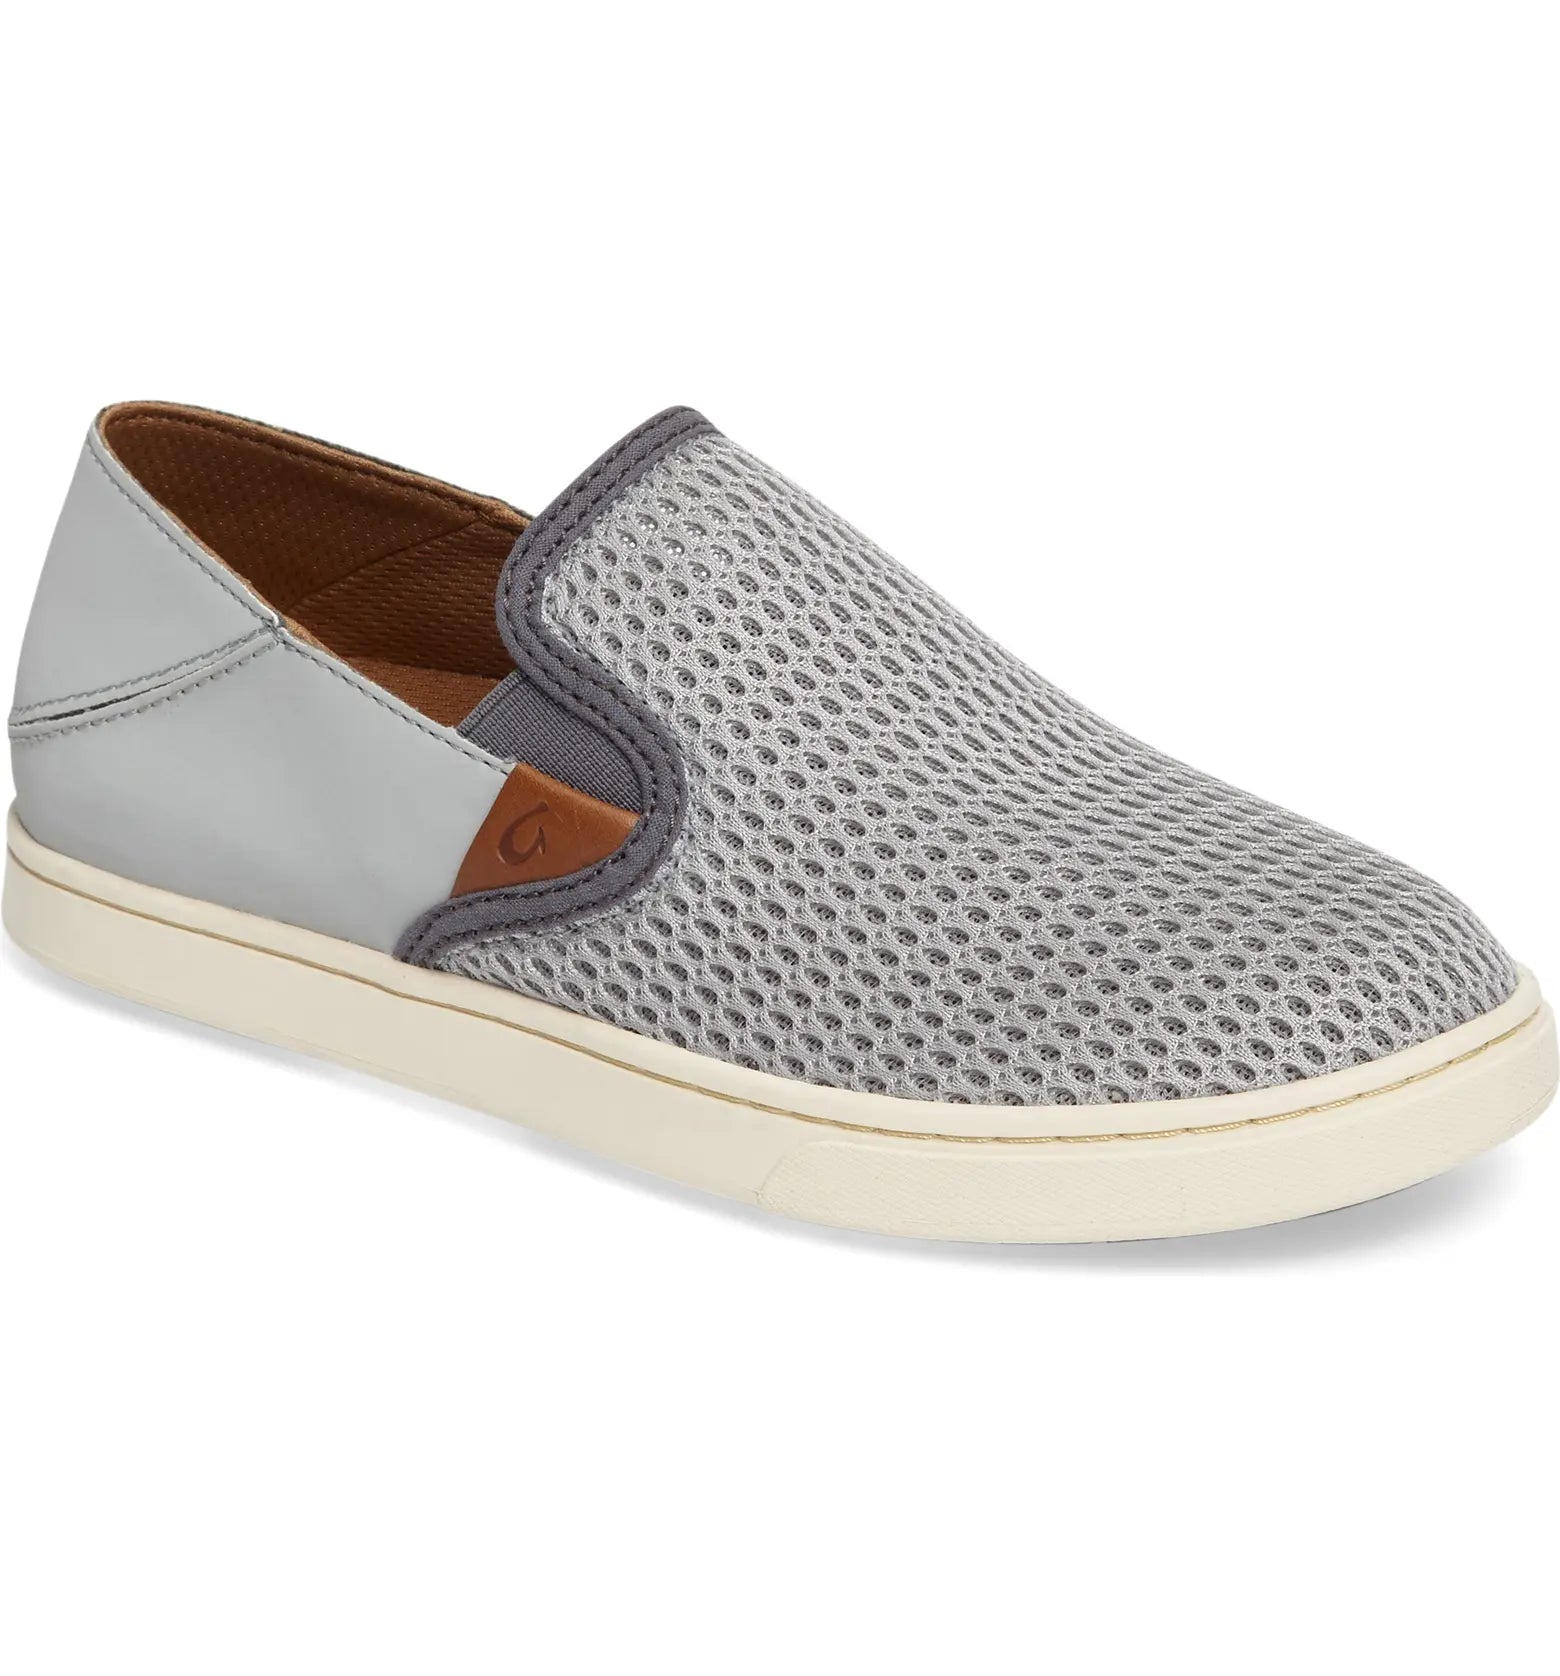 Pehuea Women's Breathable Slip-On Sneakers - Pavement